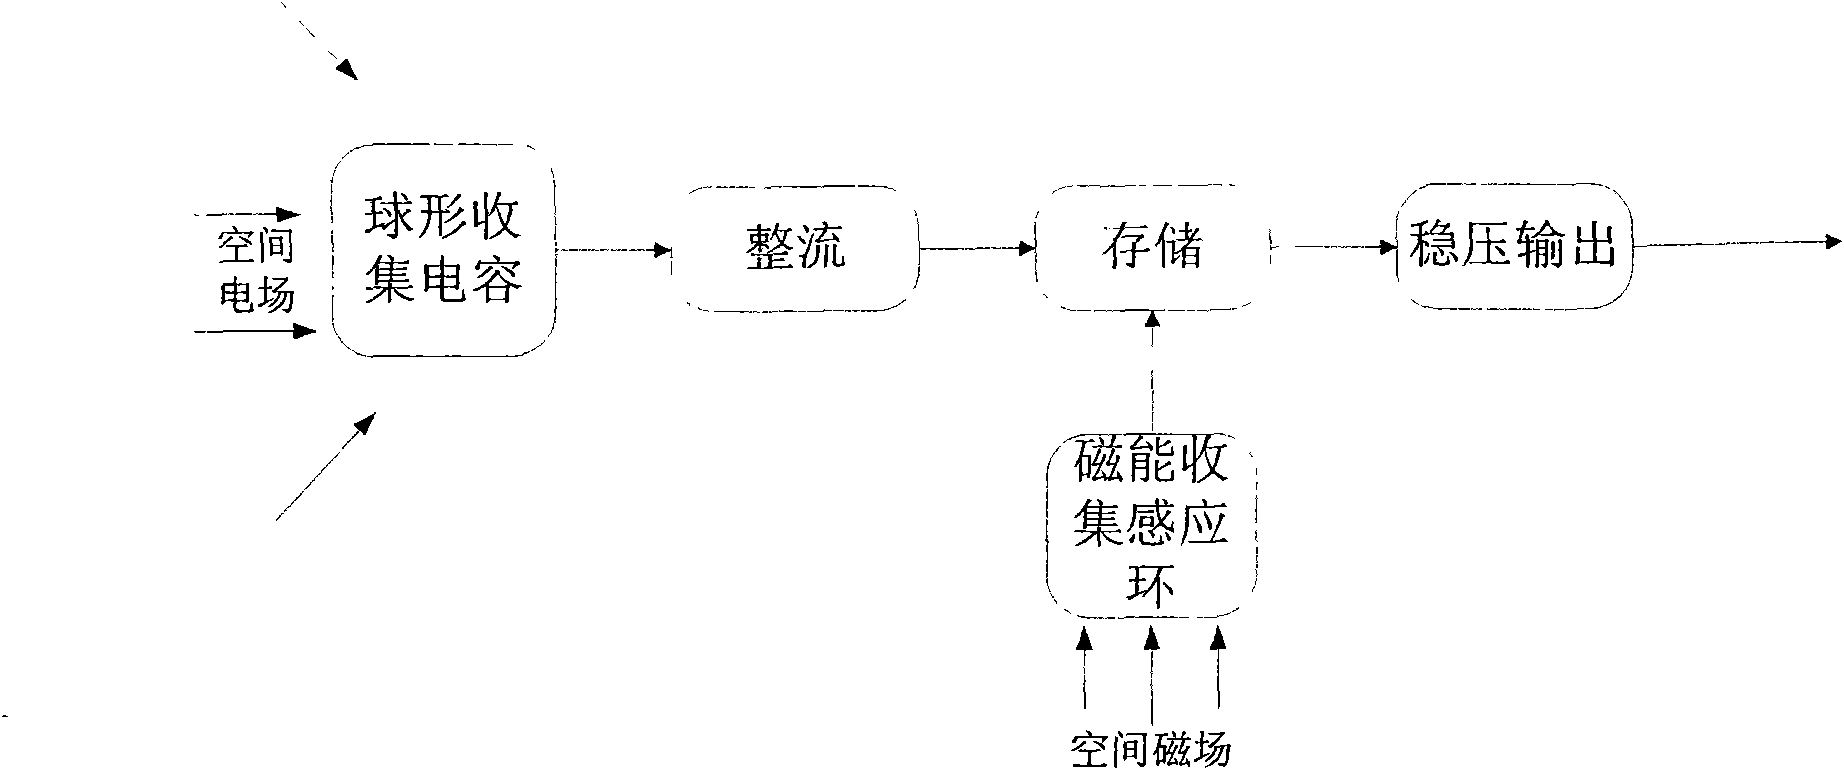 Spatial electromagnetic energy-based wireless sensor self-power supply system and spatial electromagnetic energy-based wireless sensor self-power supply method